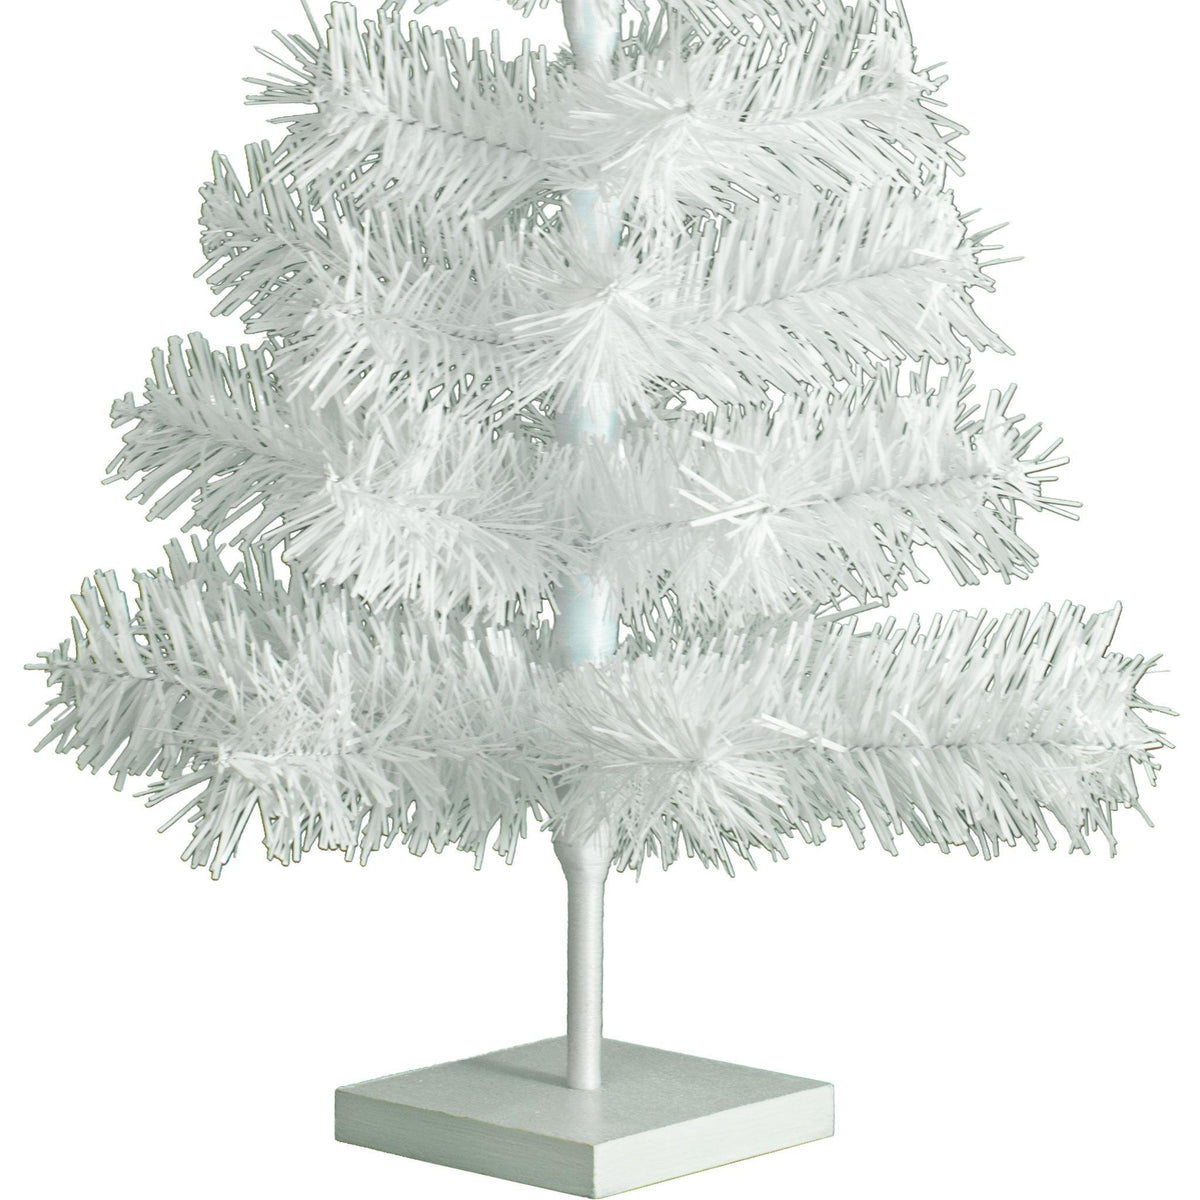 24in White Tinsel Trees come with a flat wooden stand painted in white.  Shop now at leedisplay.com